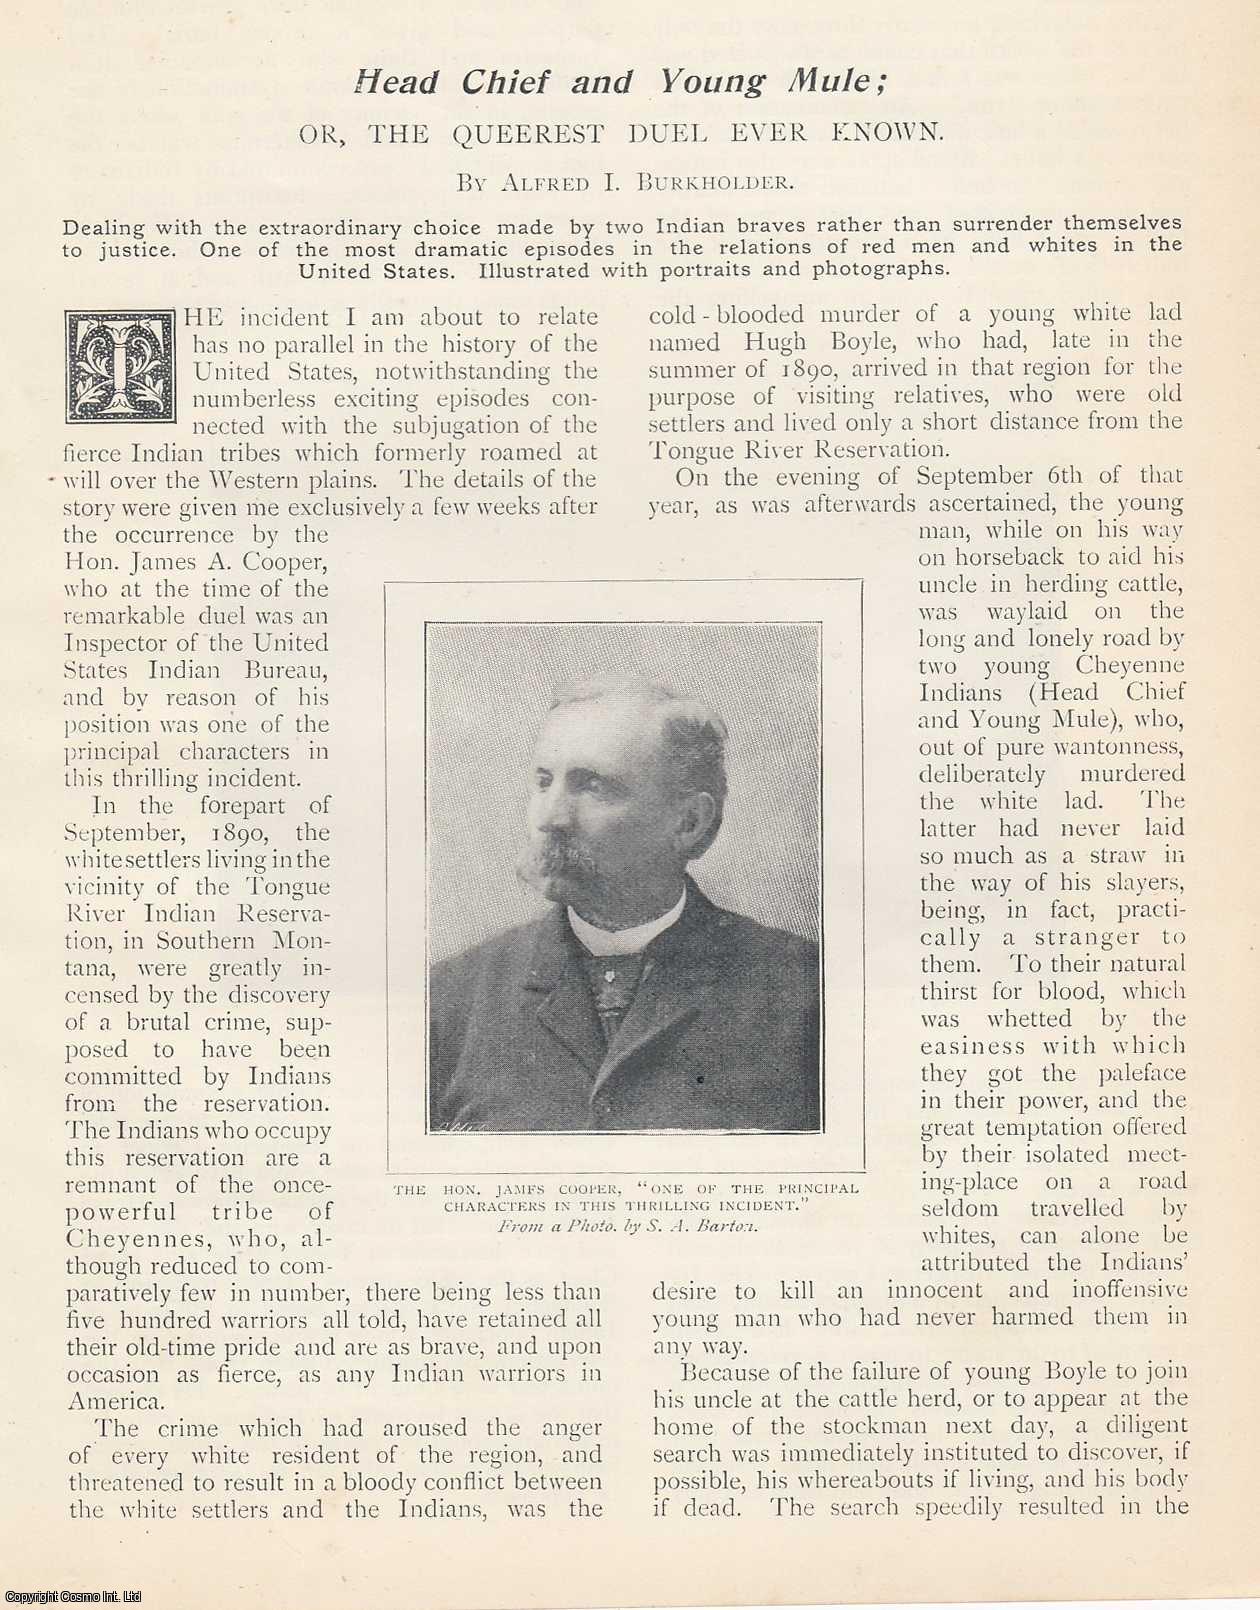 Alfred I. Burkholder - Head Chief and Young Mule; or The Queerest Duel Ever Known. An uncommon original article from the Wide World Magazine, 1899.